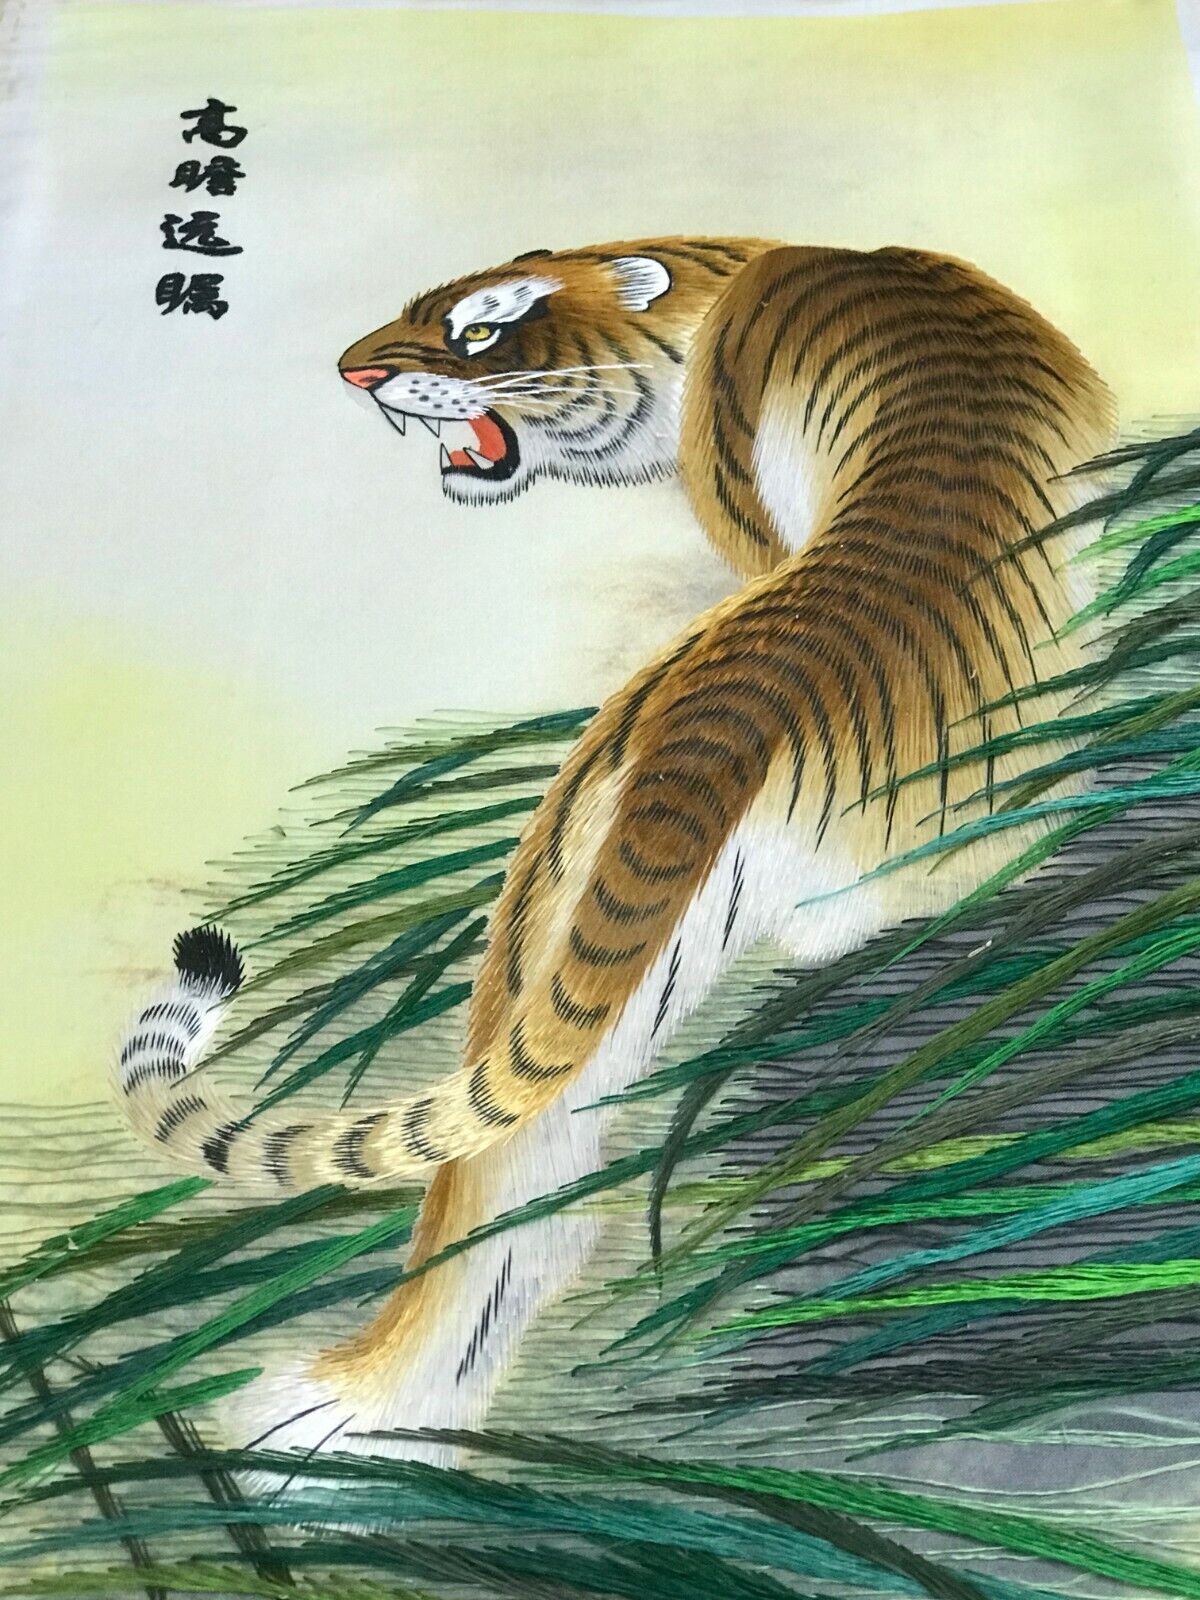 Chinese Handmade Silk Embroidery Art Of Tiger In The Grass No Frame